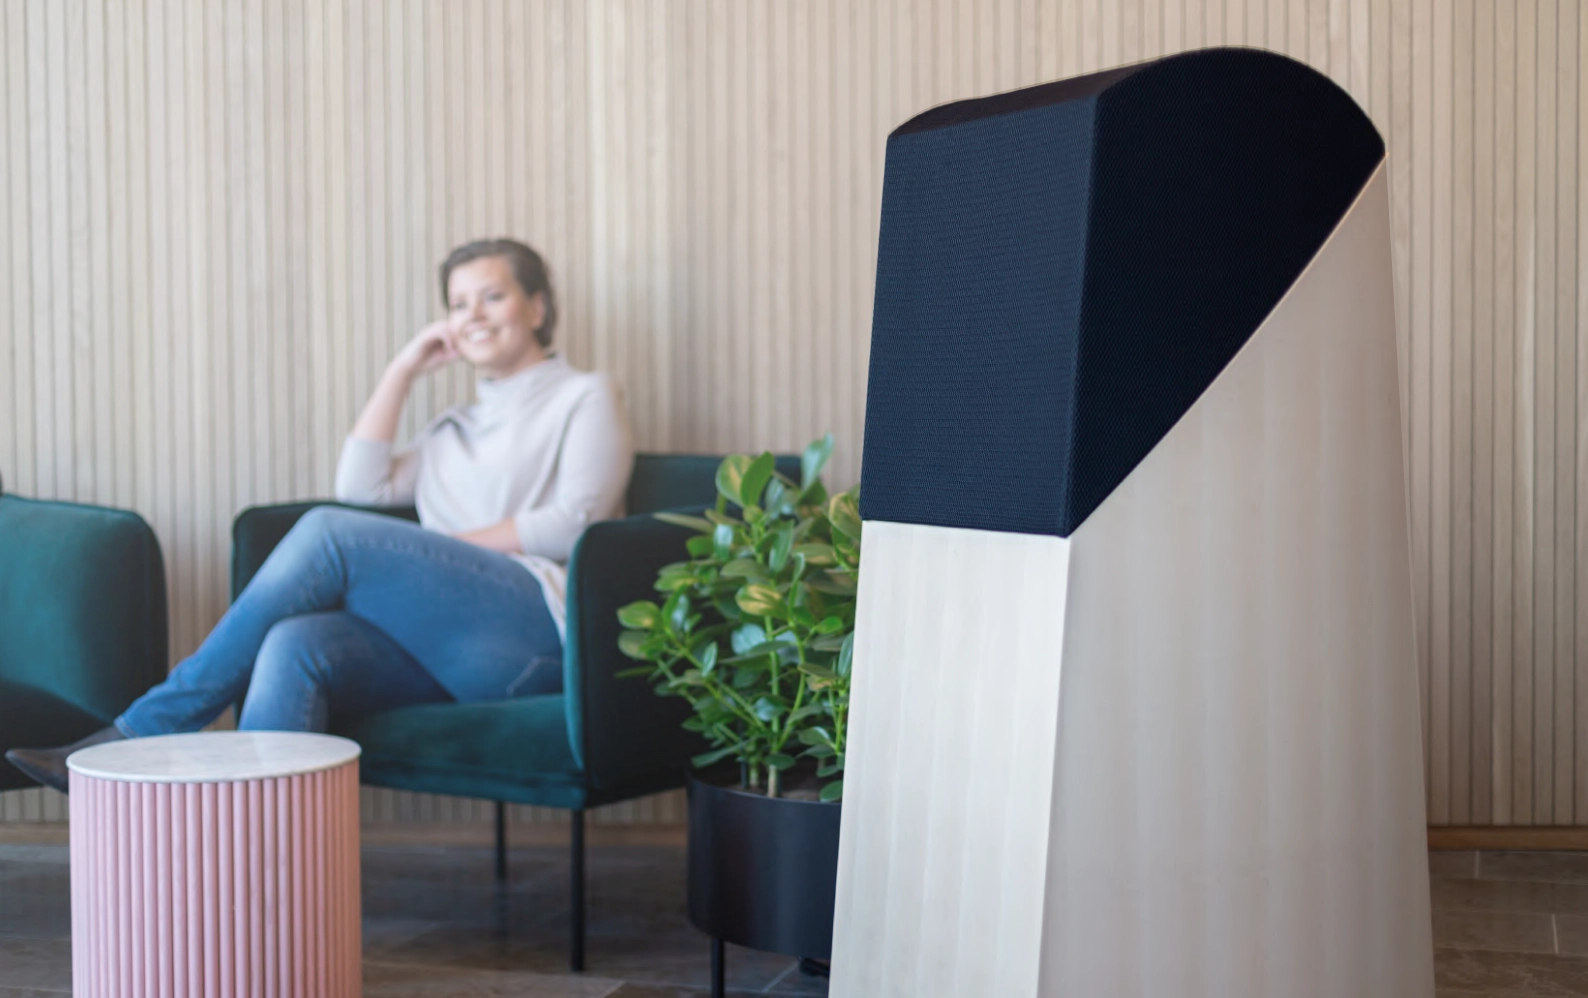 Air0 indoor air purifier to remove toxic particles in office